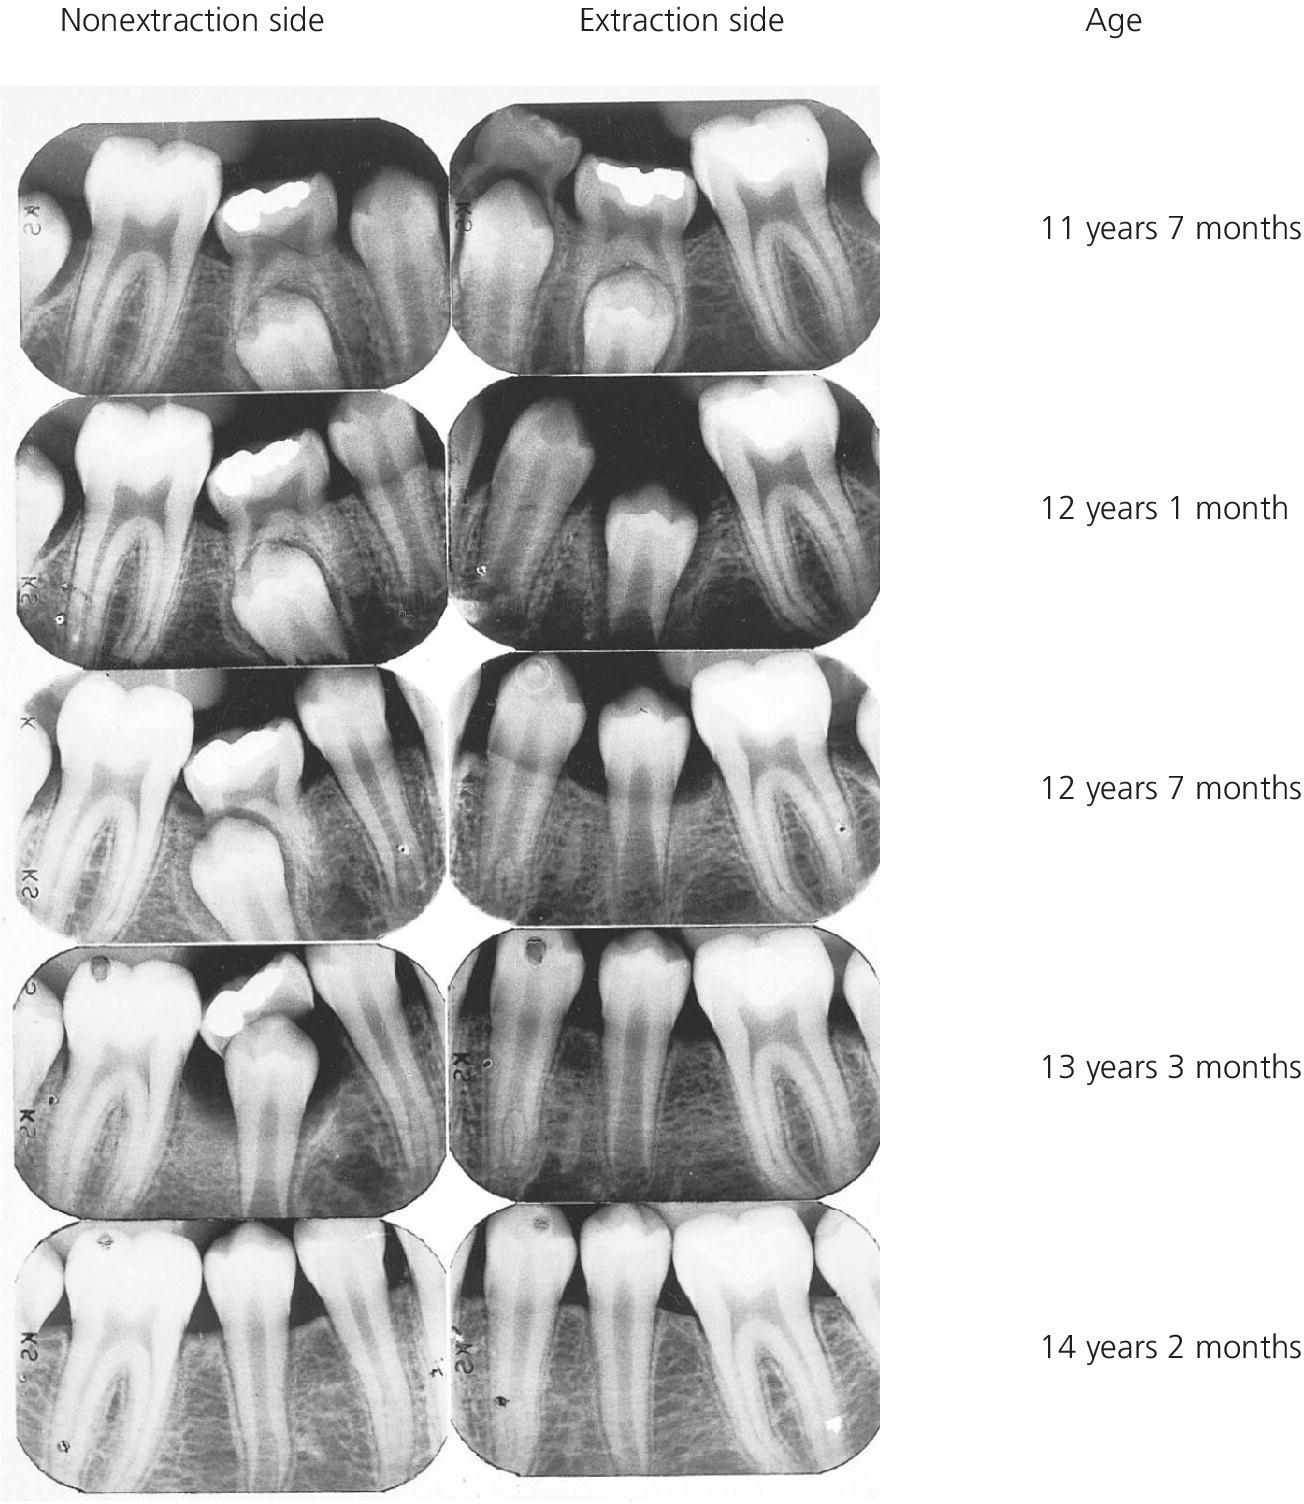 Radiographs of infraoclusion of primary molars of a boy from 11 years 7 months to 14 years 2 months of age displaying nonextraction (left) and extraction sides (right).